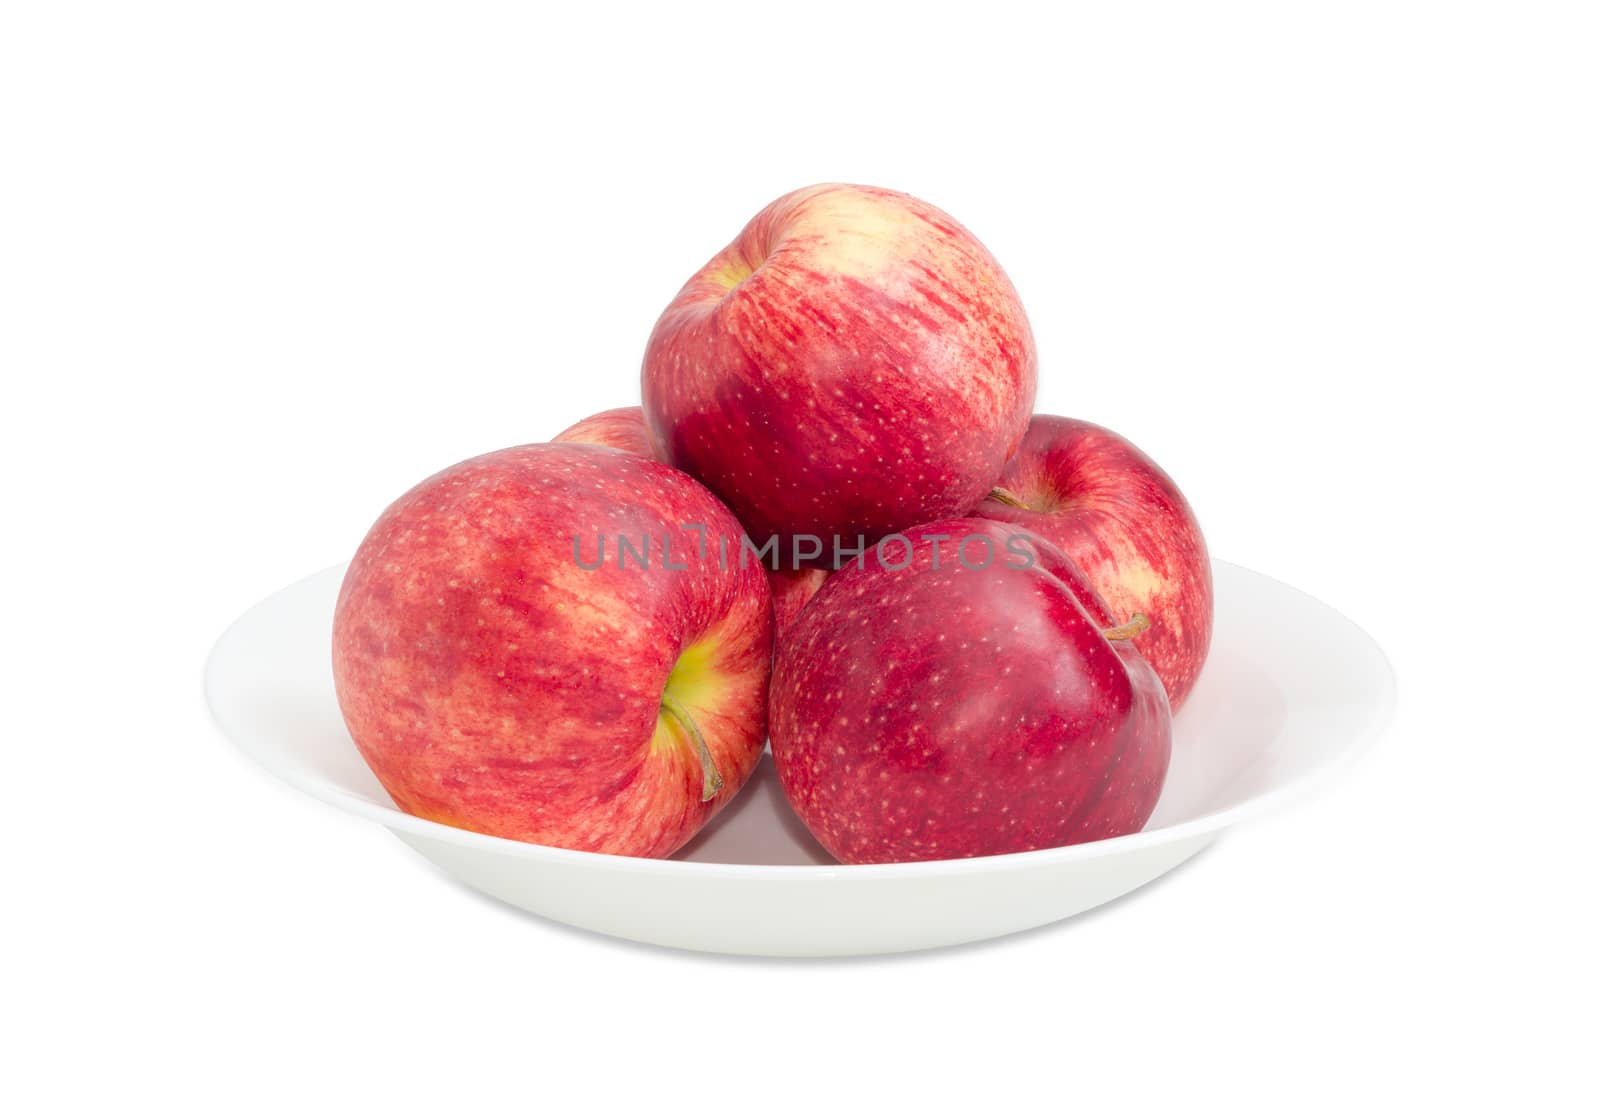 Several red apples on a white dish closeup by anmbph